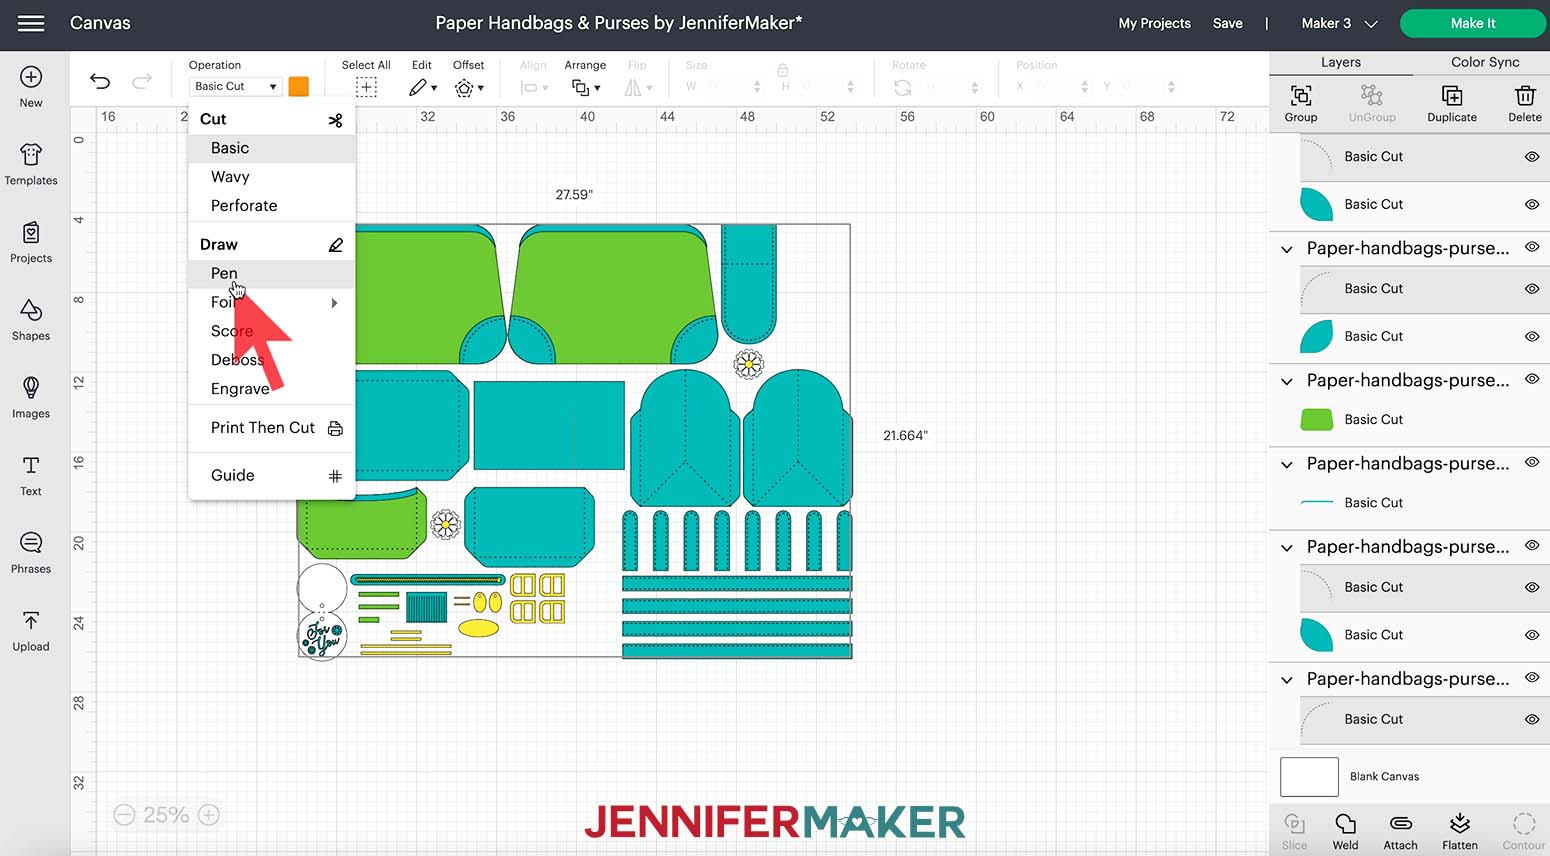 A screenshot of the paper handbags design on the Cricut Design Space canvas showing four layers selected and the mouse pointer hovering over Pen in the Operation menu